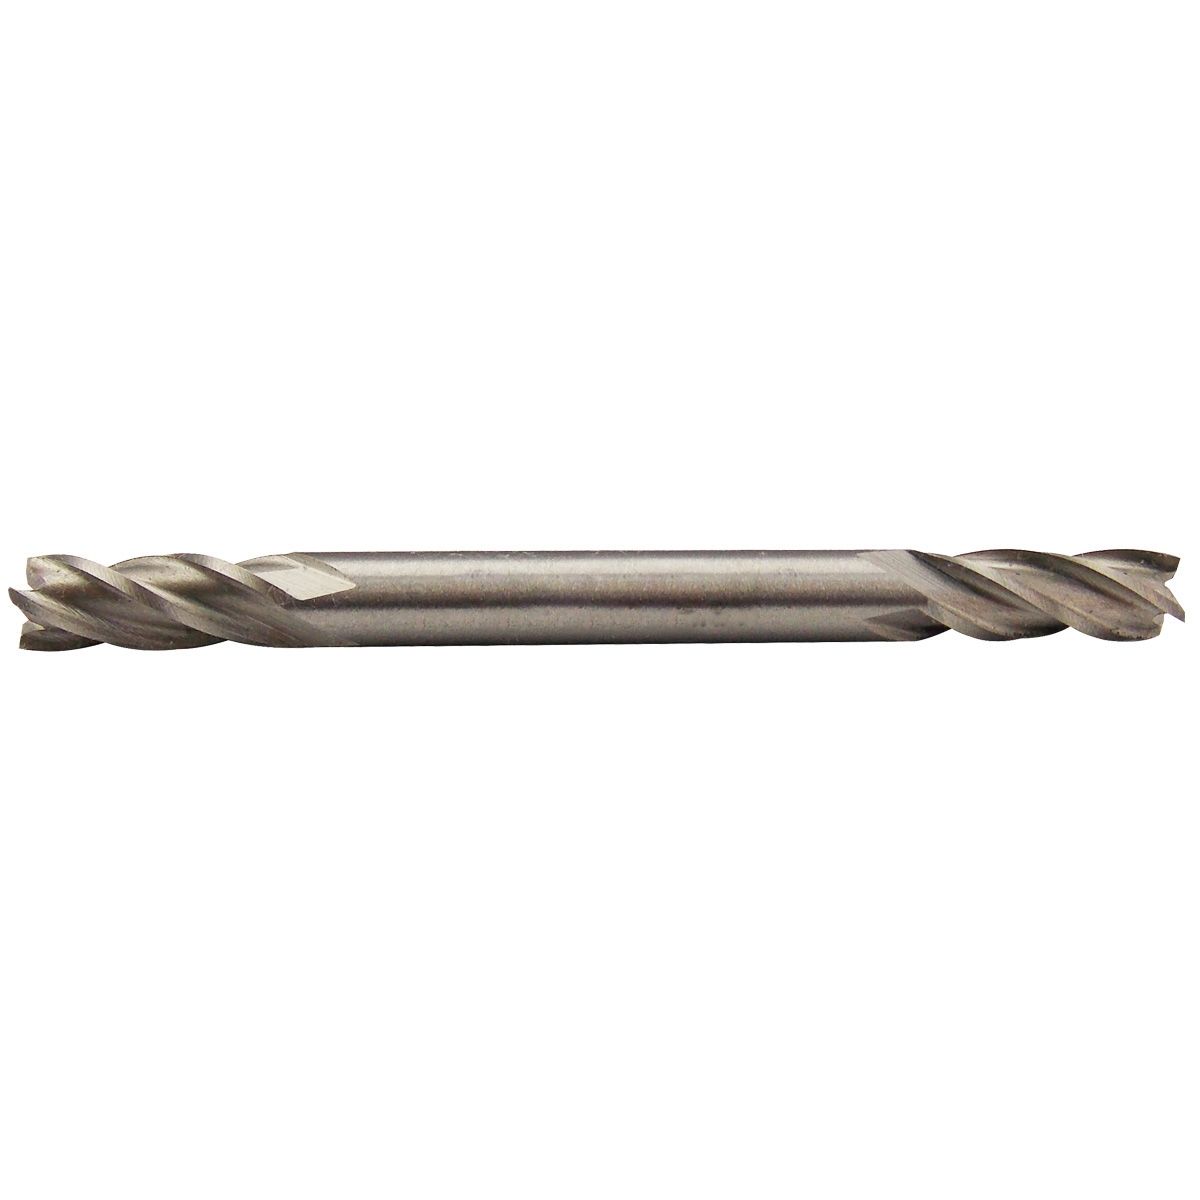 5/32" 4 FLUTE MINI HIGH SPEED STEEL DOUBLE END END MILL (5831-0030)